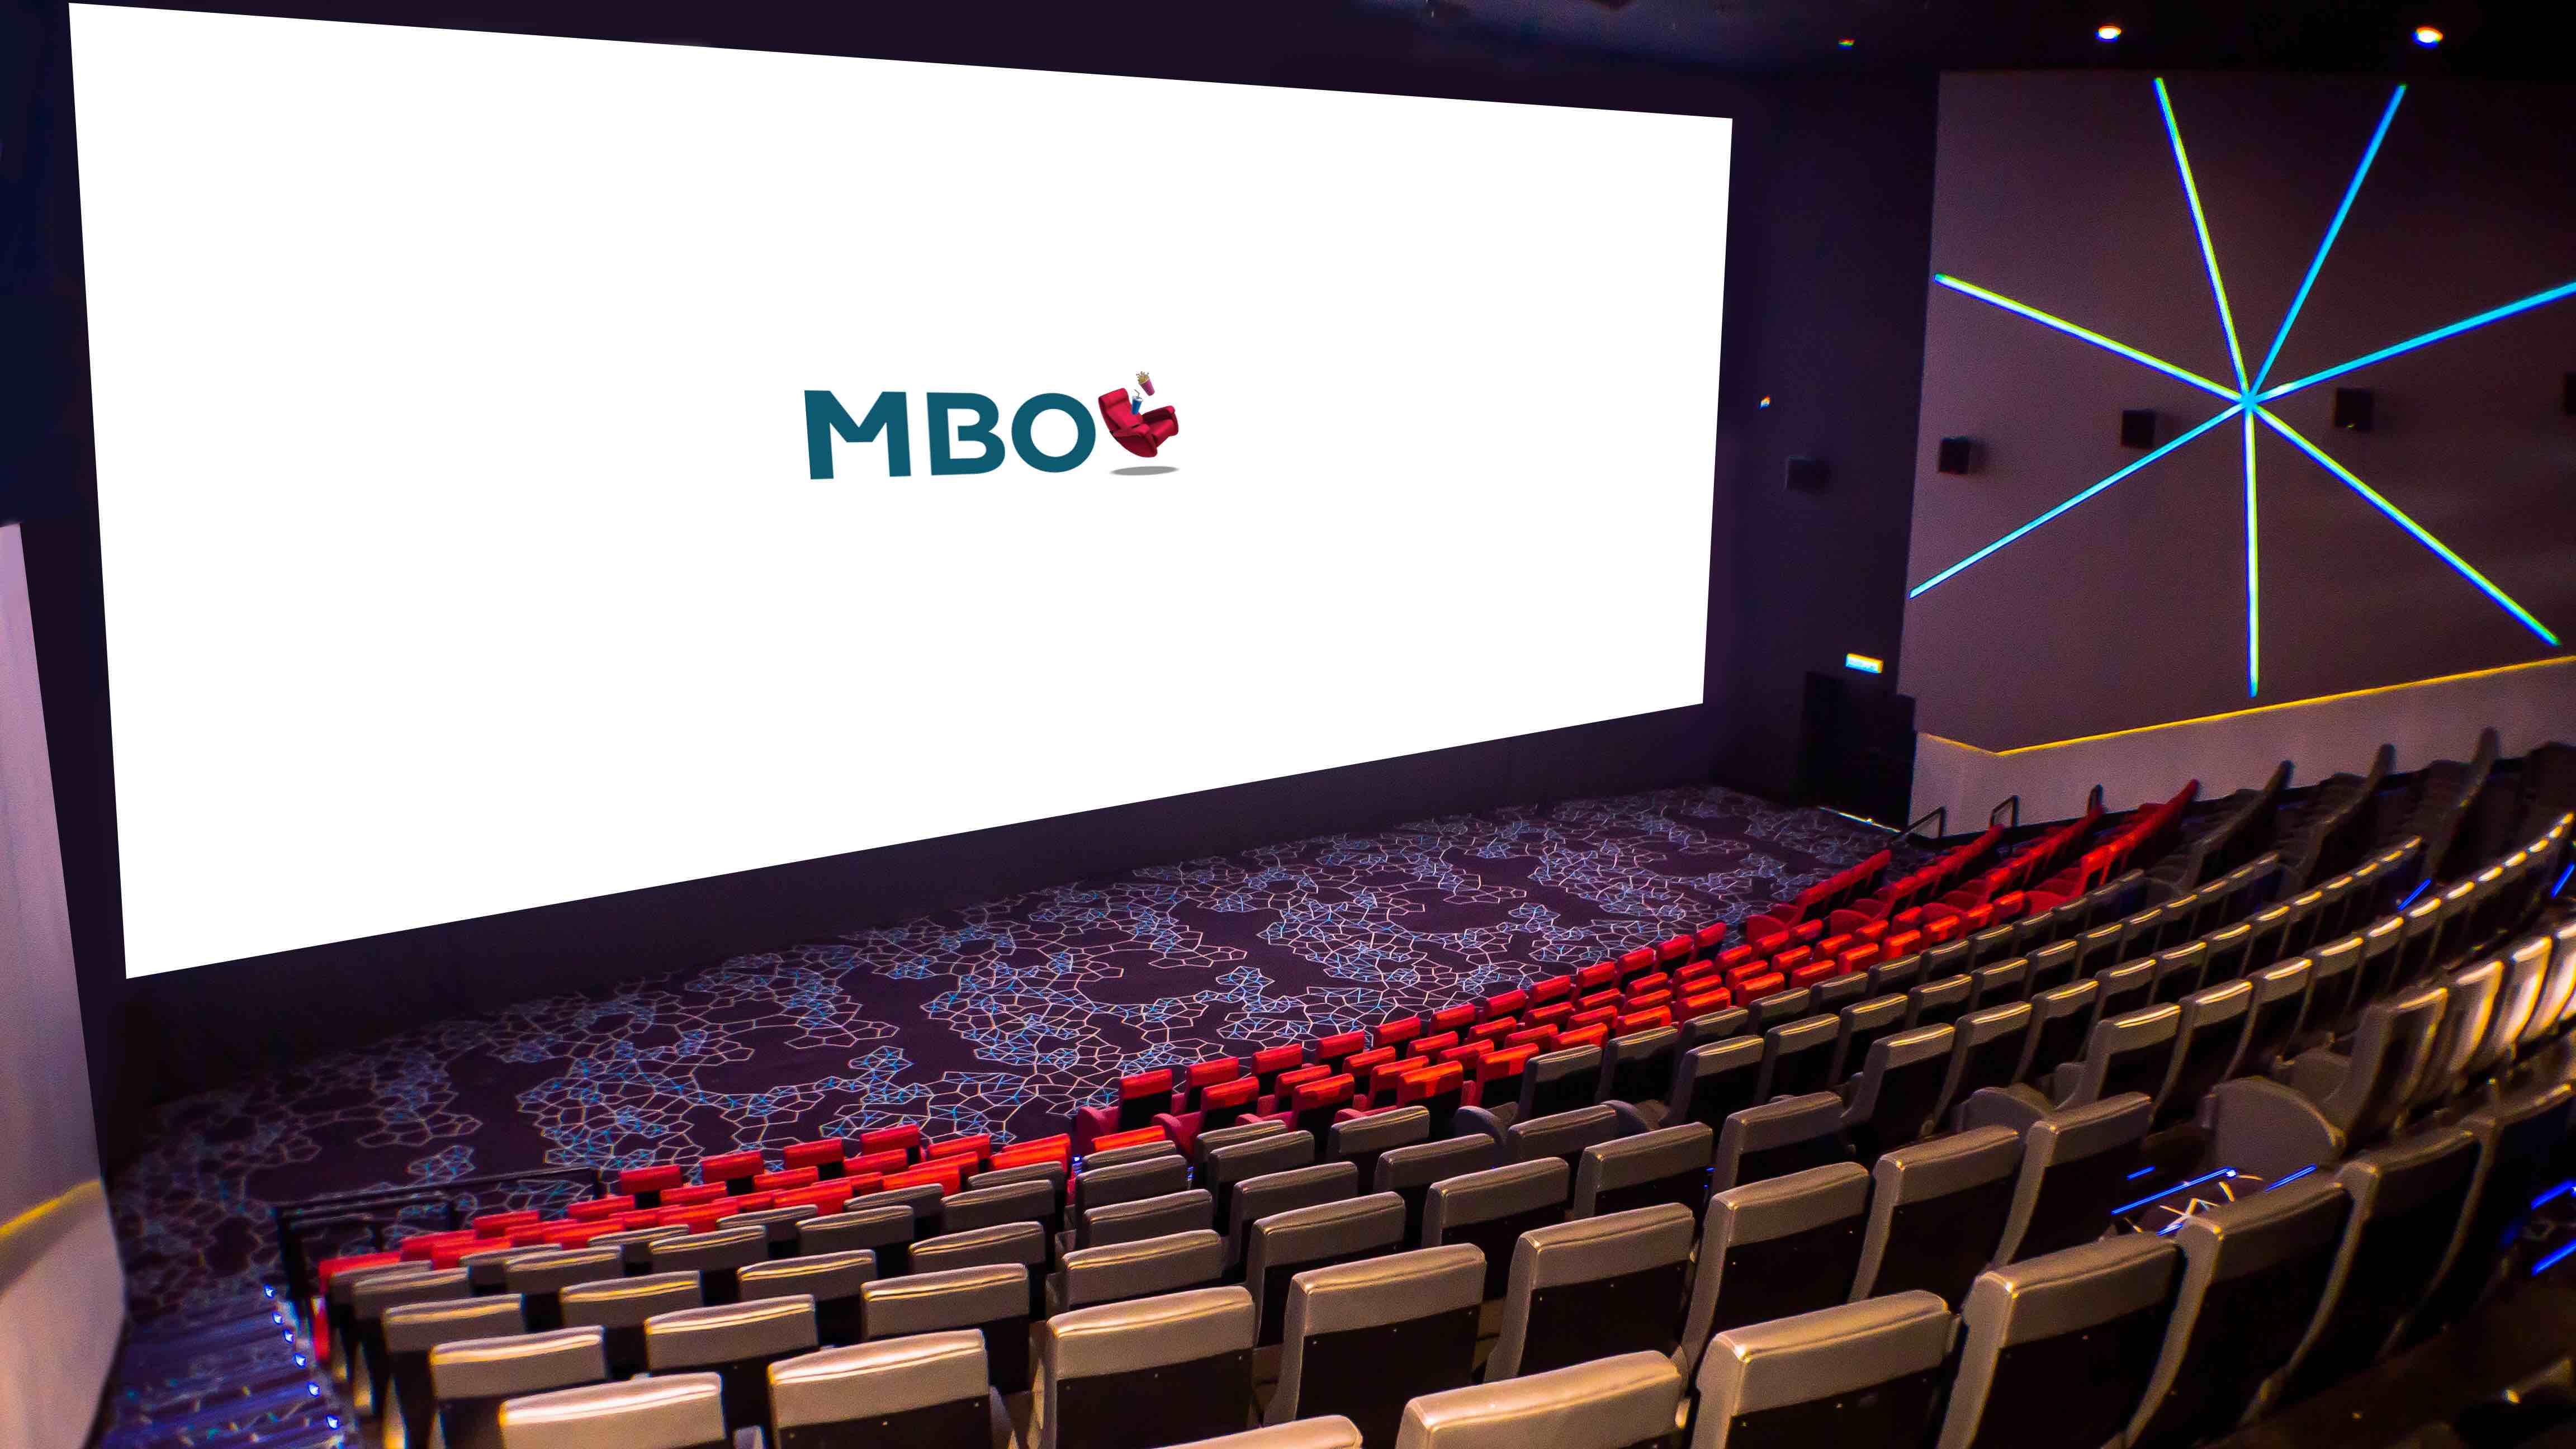 MBO Cinemas Just Set Up The Largest Screen In The East Coast